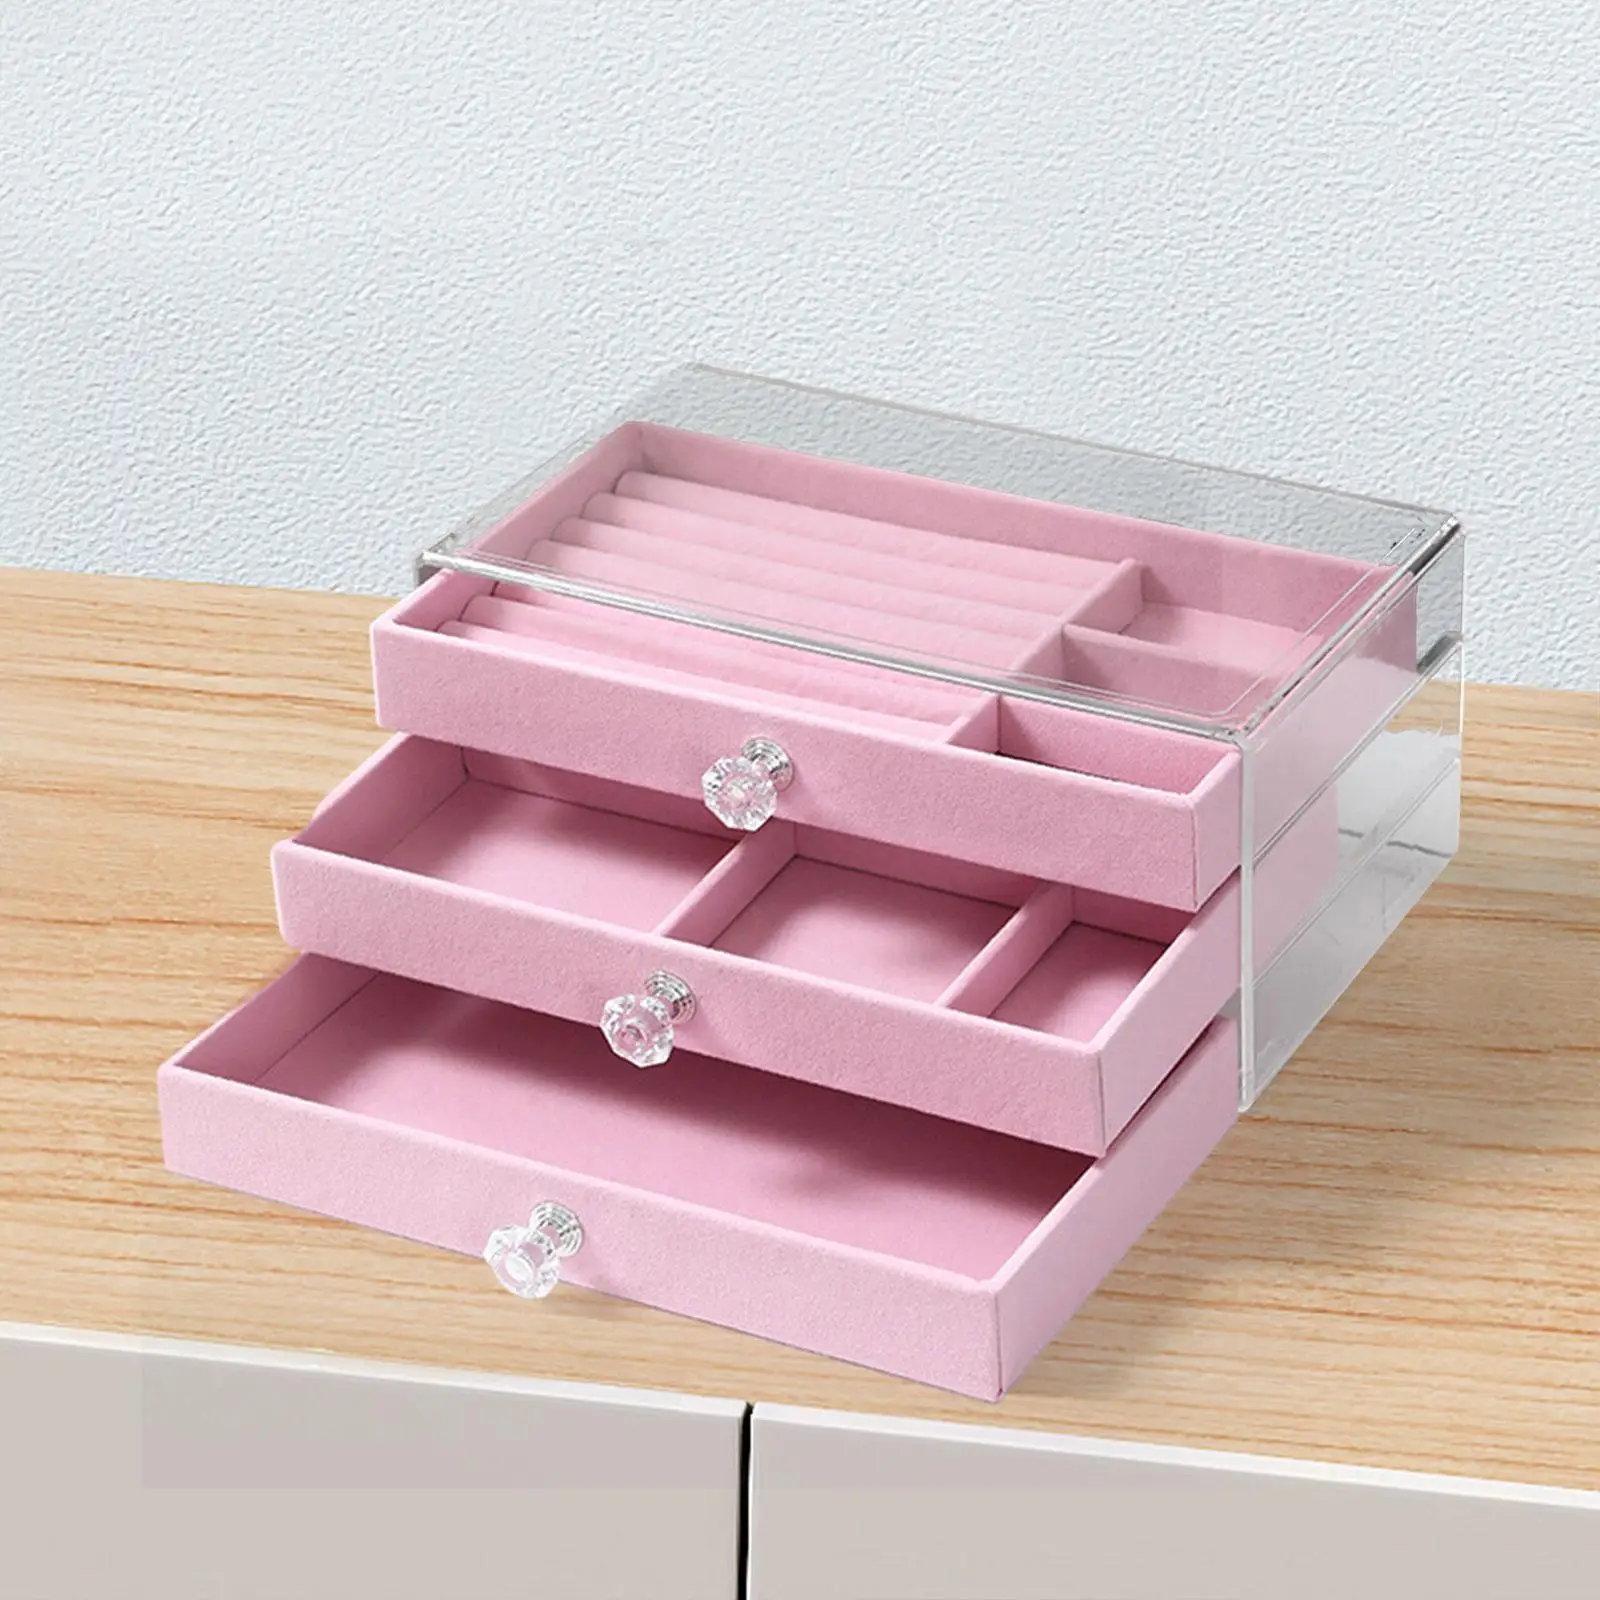 Portable Jewelry Box Large Capacity Rings Mirrored 3 Layer for Women Girls Jewelry Storage Box for Friends, Wife or Mother Gift